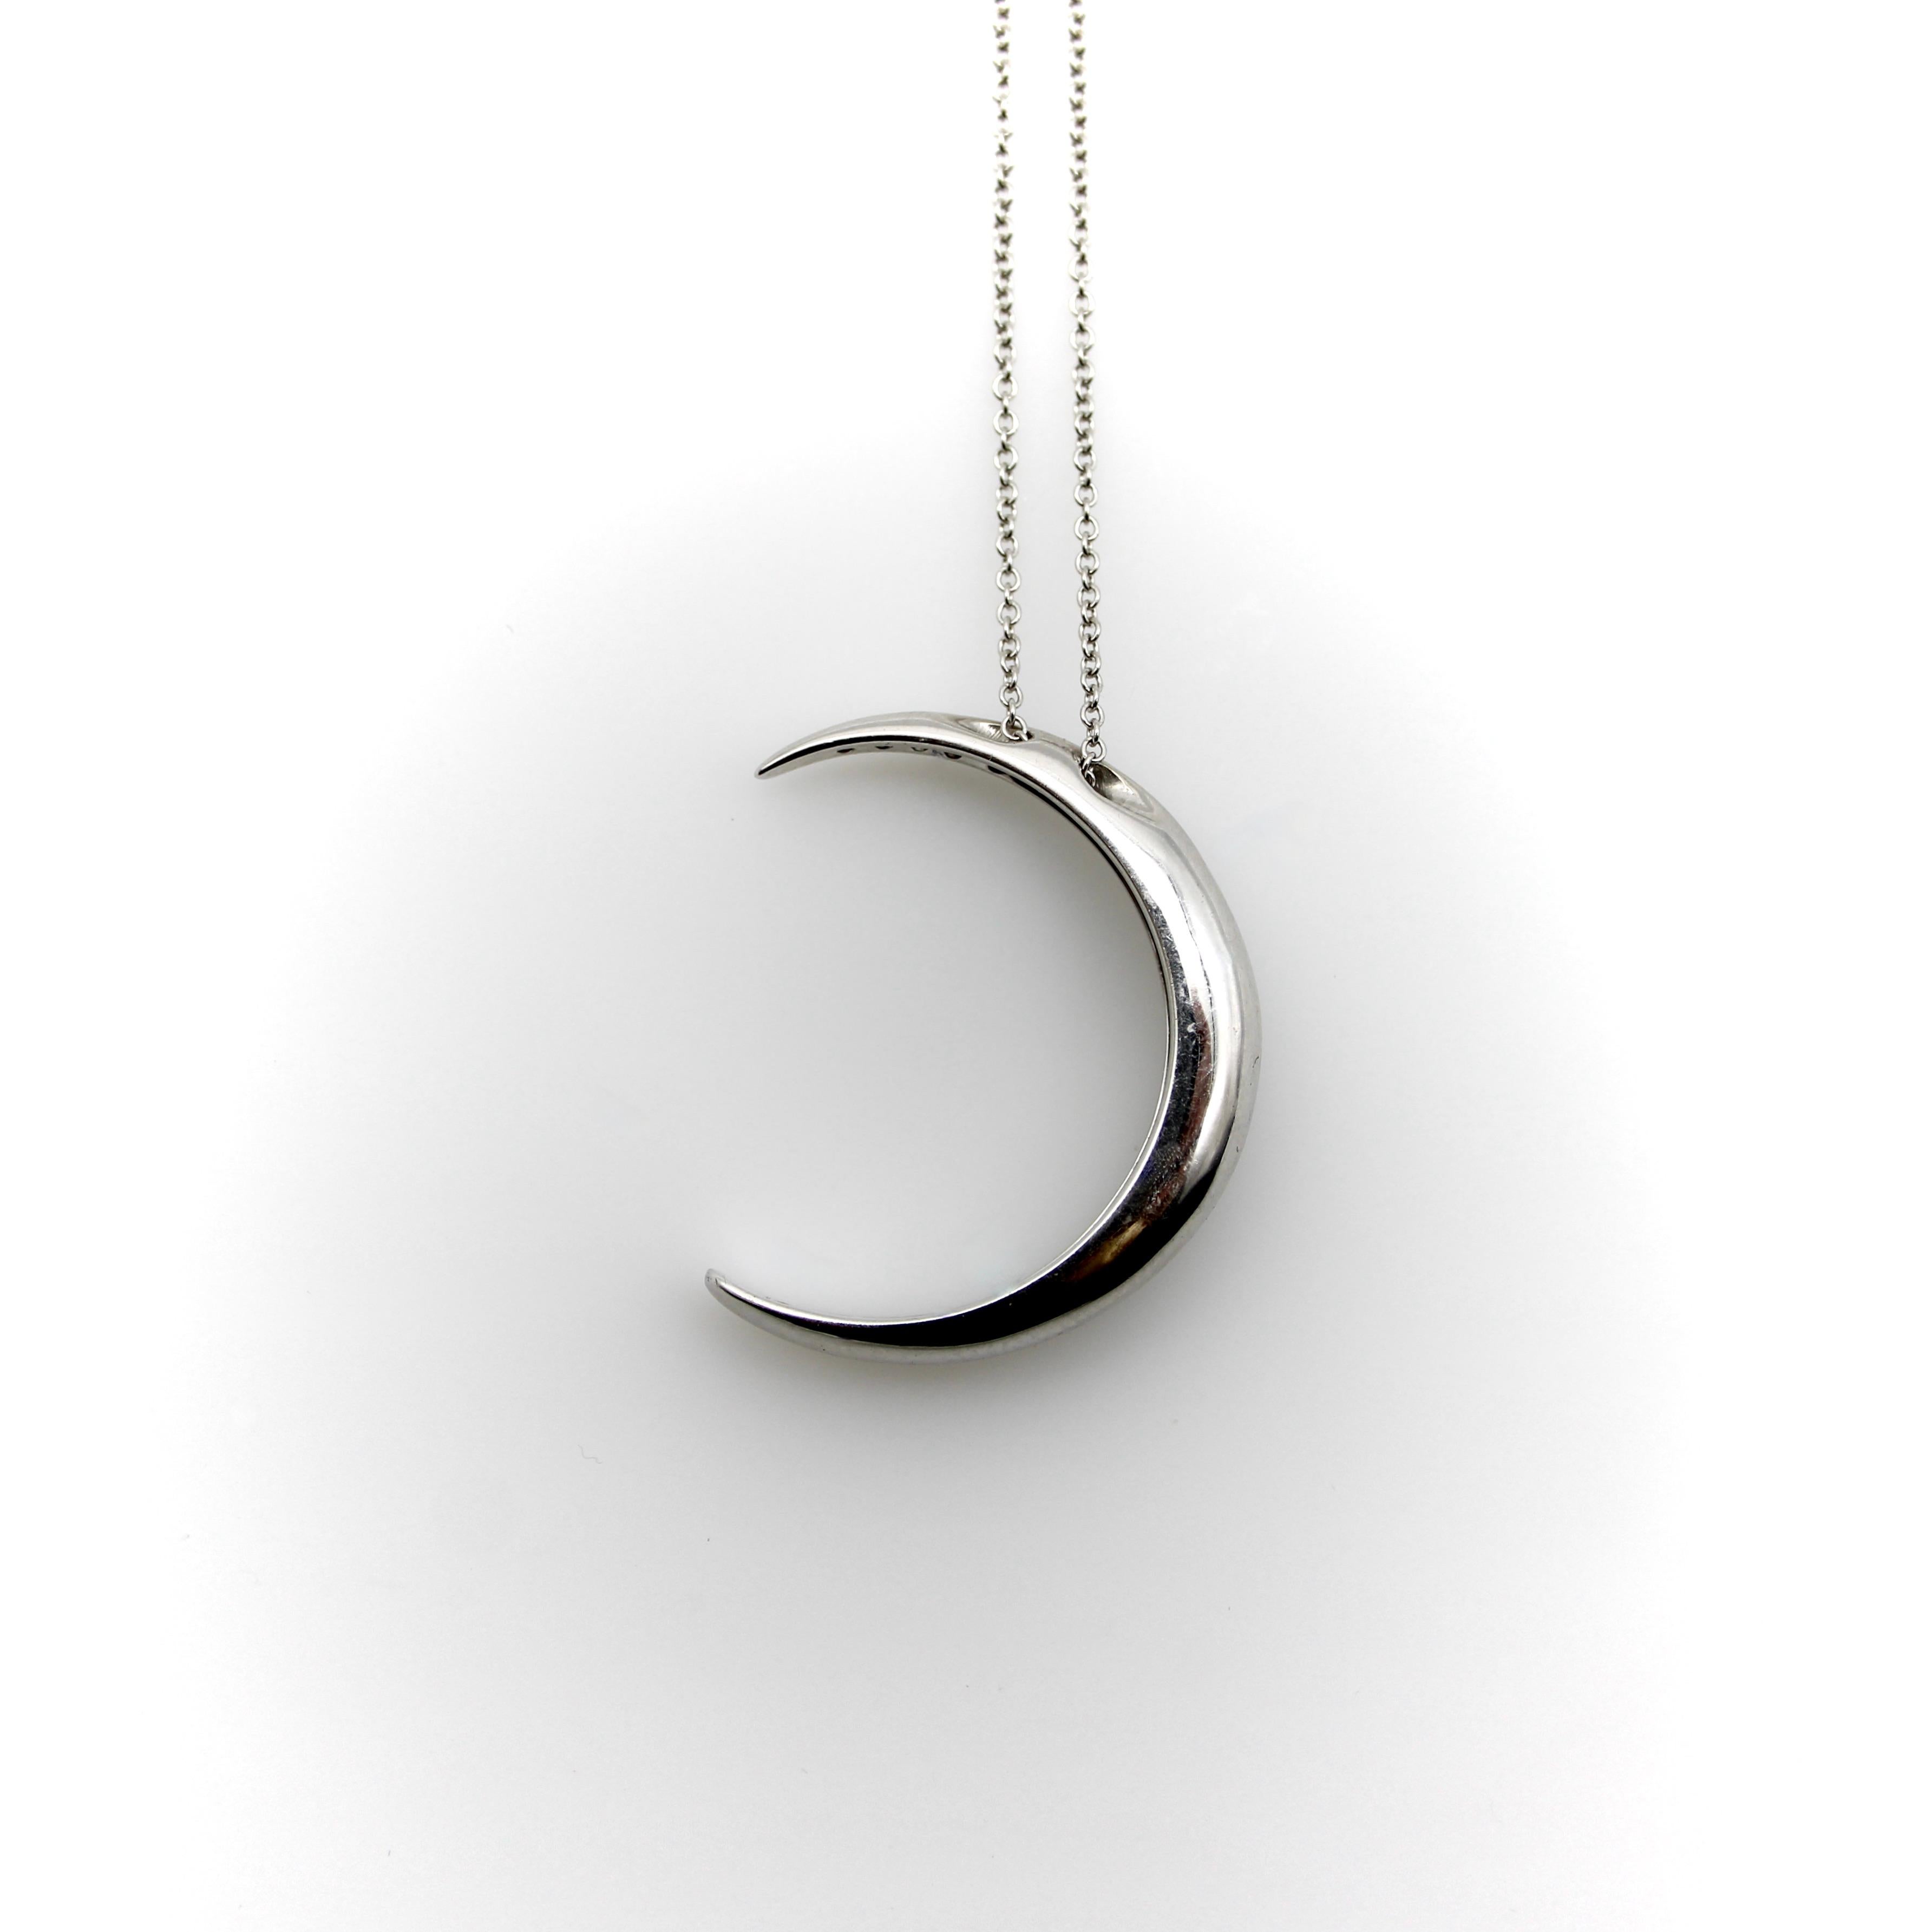 This 18k white gold crescent moon necklace is encrusted with sparkling diamonds. The crescent moon has a rounded shape, with wonderful dimension—when it hangs from the chain it has depth that draws the eye to this excellent piece. Circa 1980’s, this